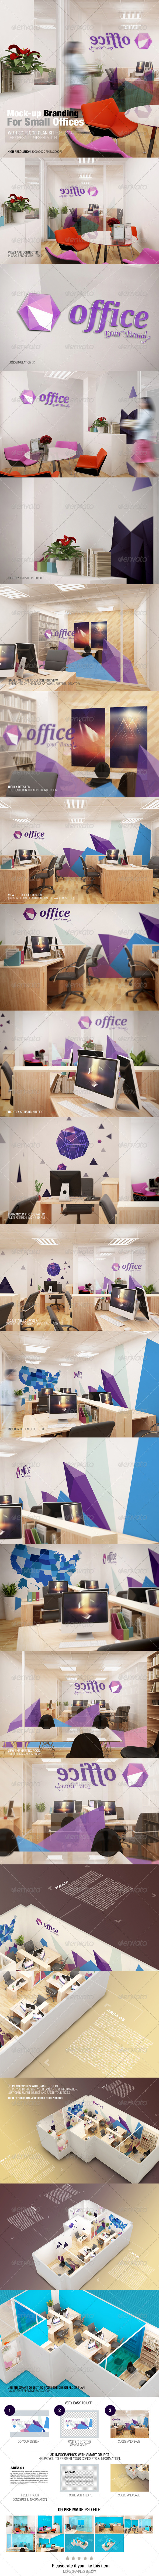 GraphicRiver Mockup Branding For Small Offices 7688046